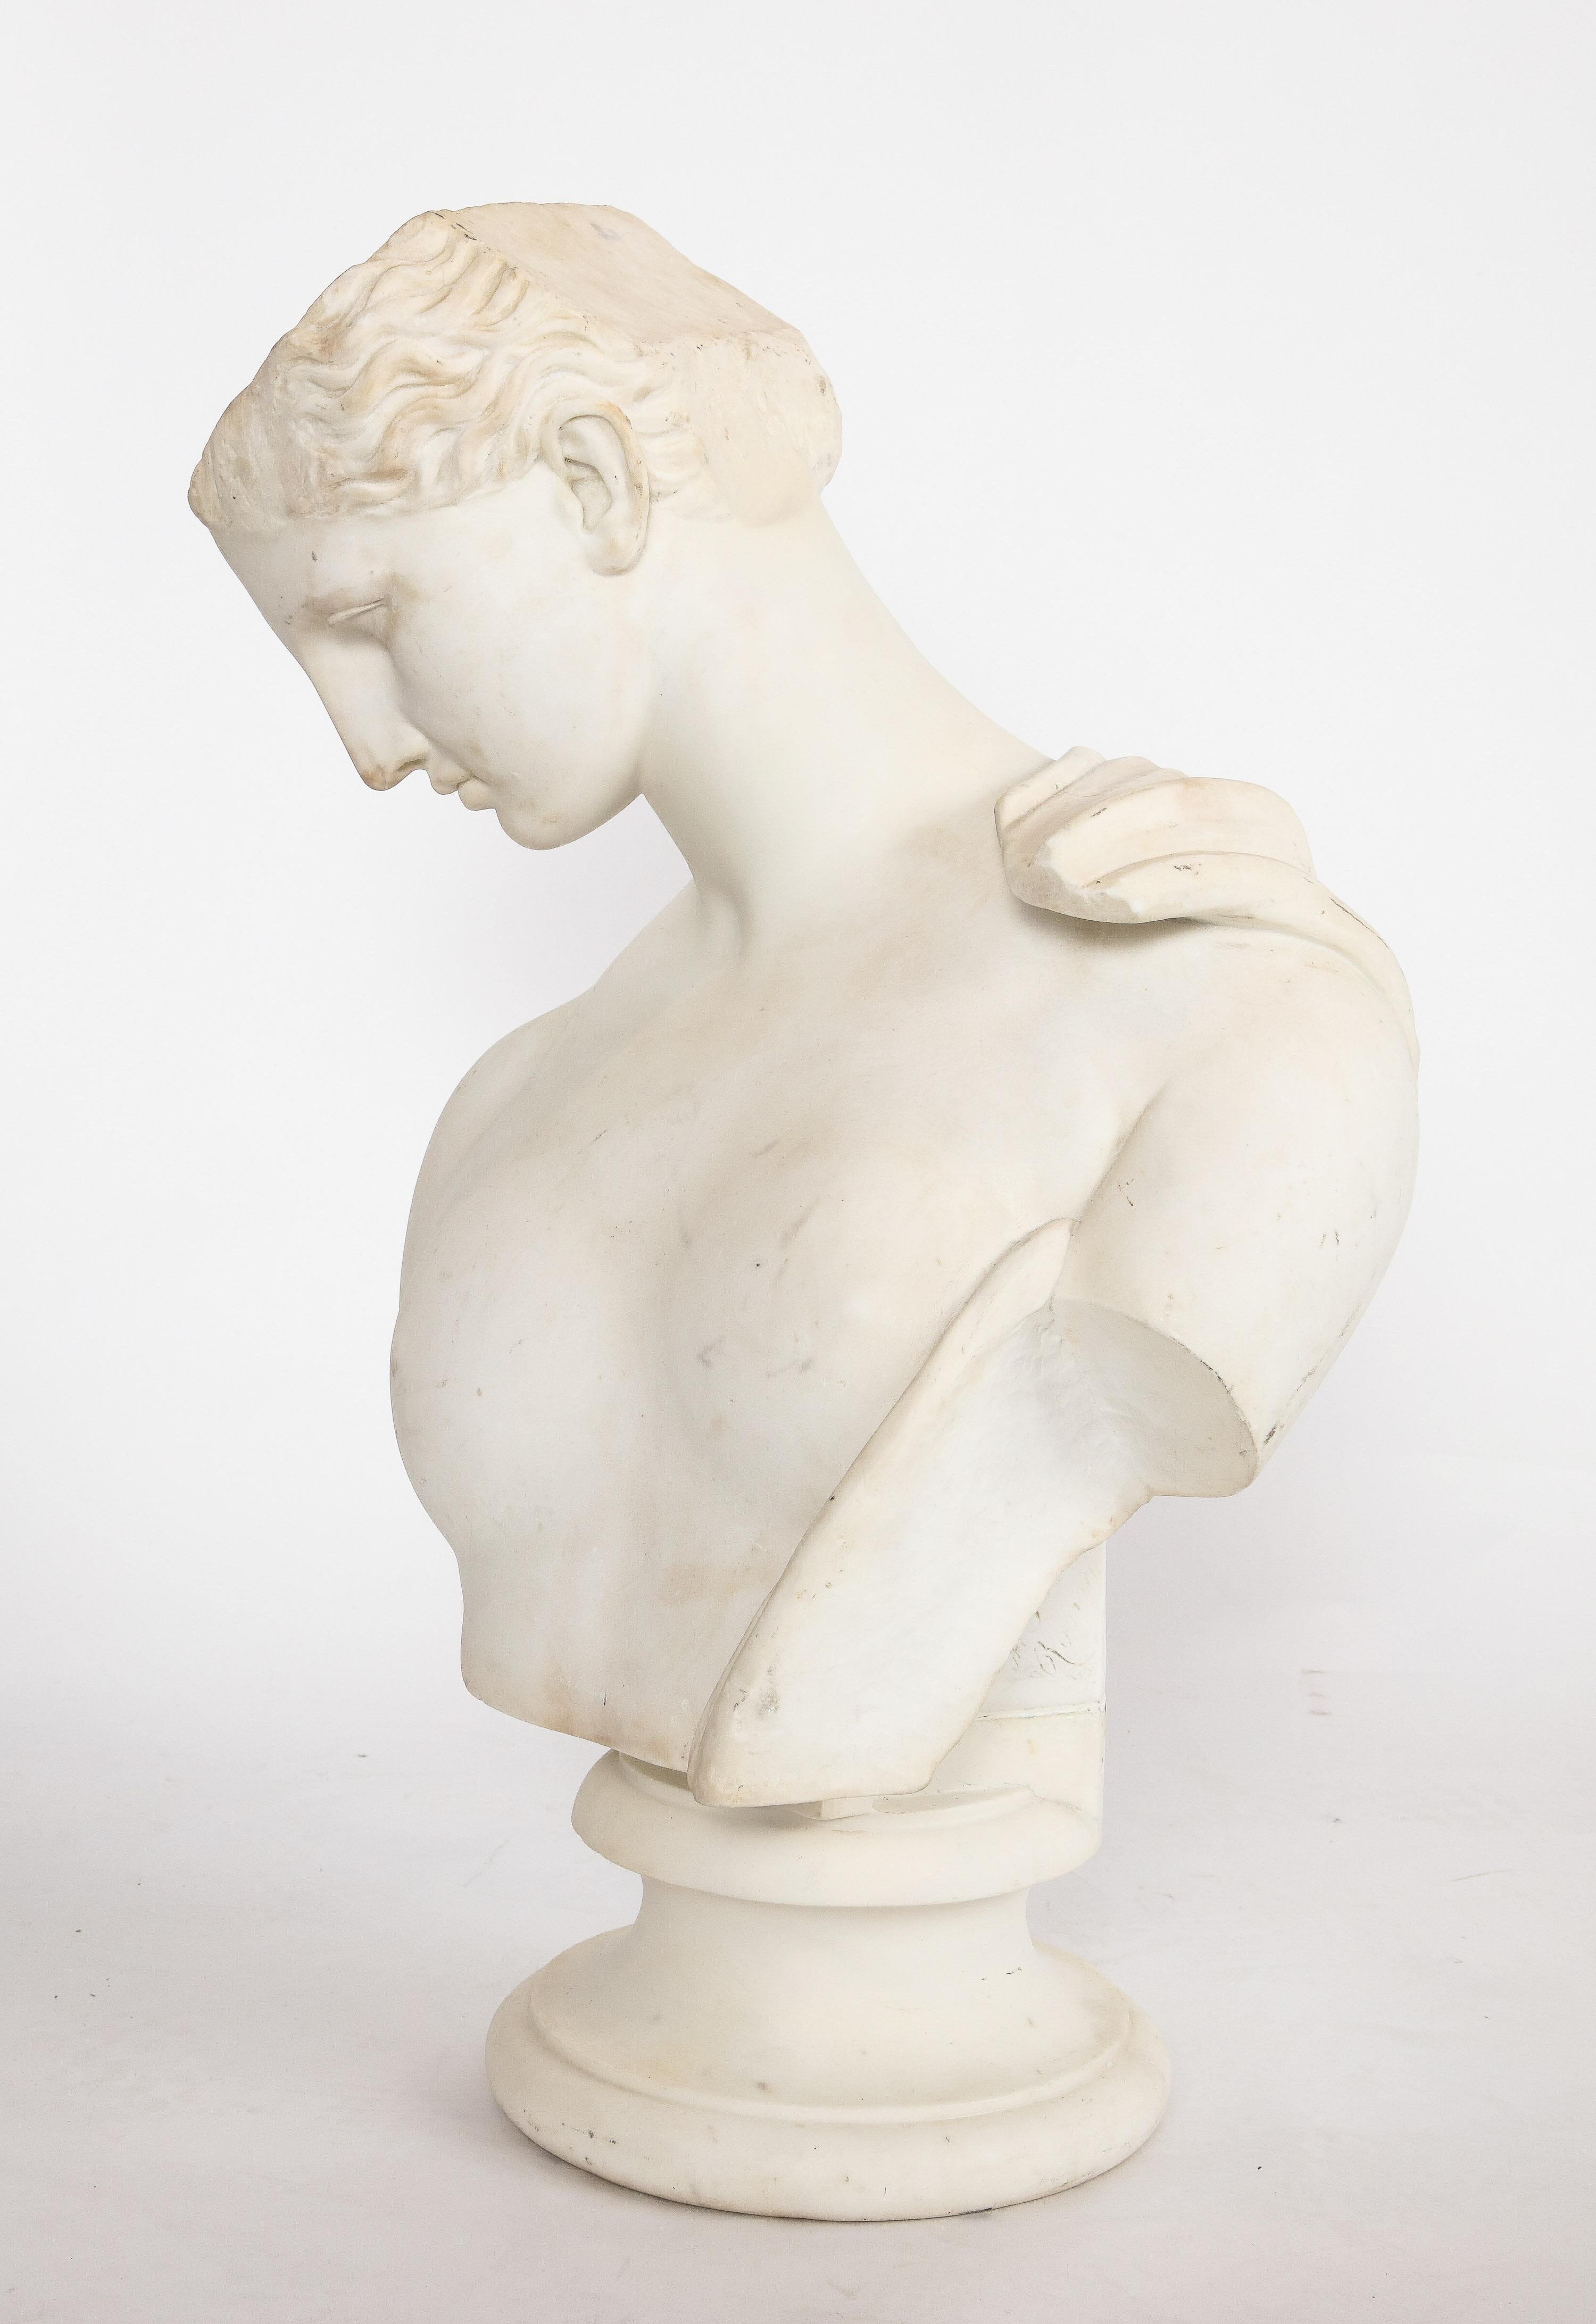 An Antique Italian Neoclassical Marble Bust of Psyche, by Giuseppe Carnevale 16